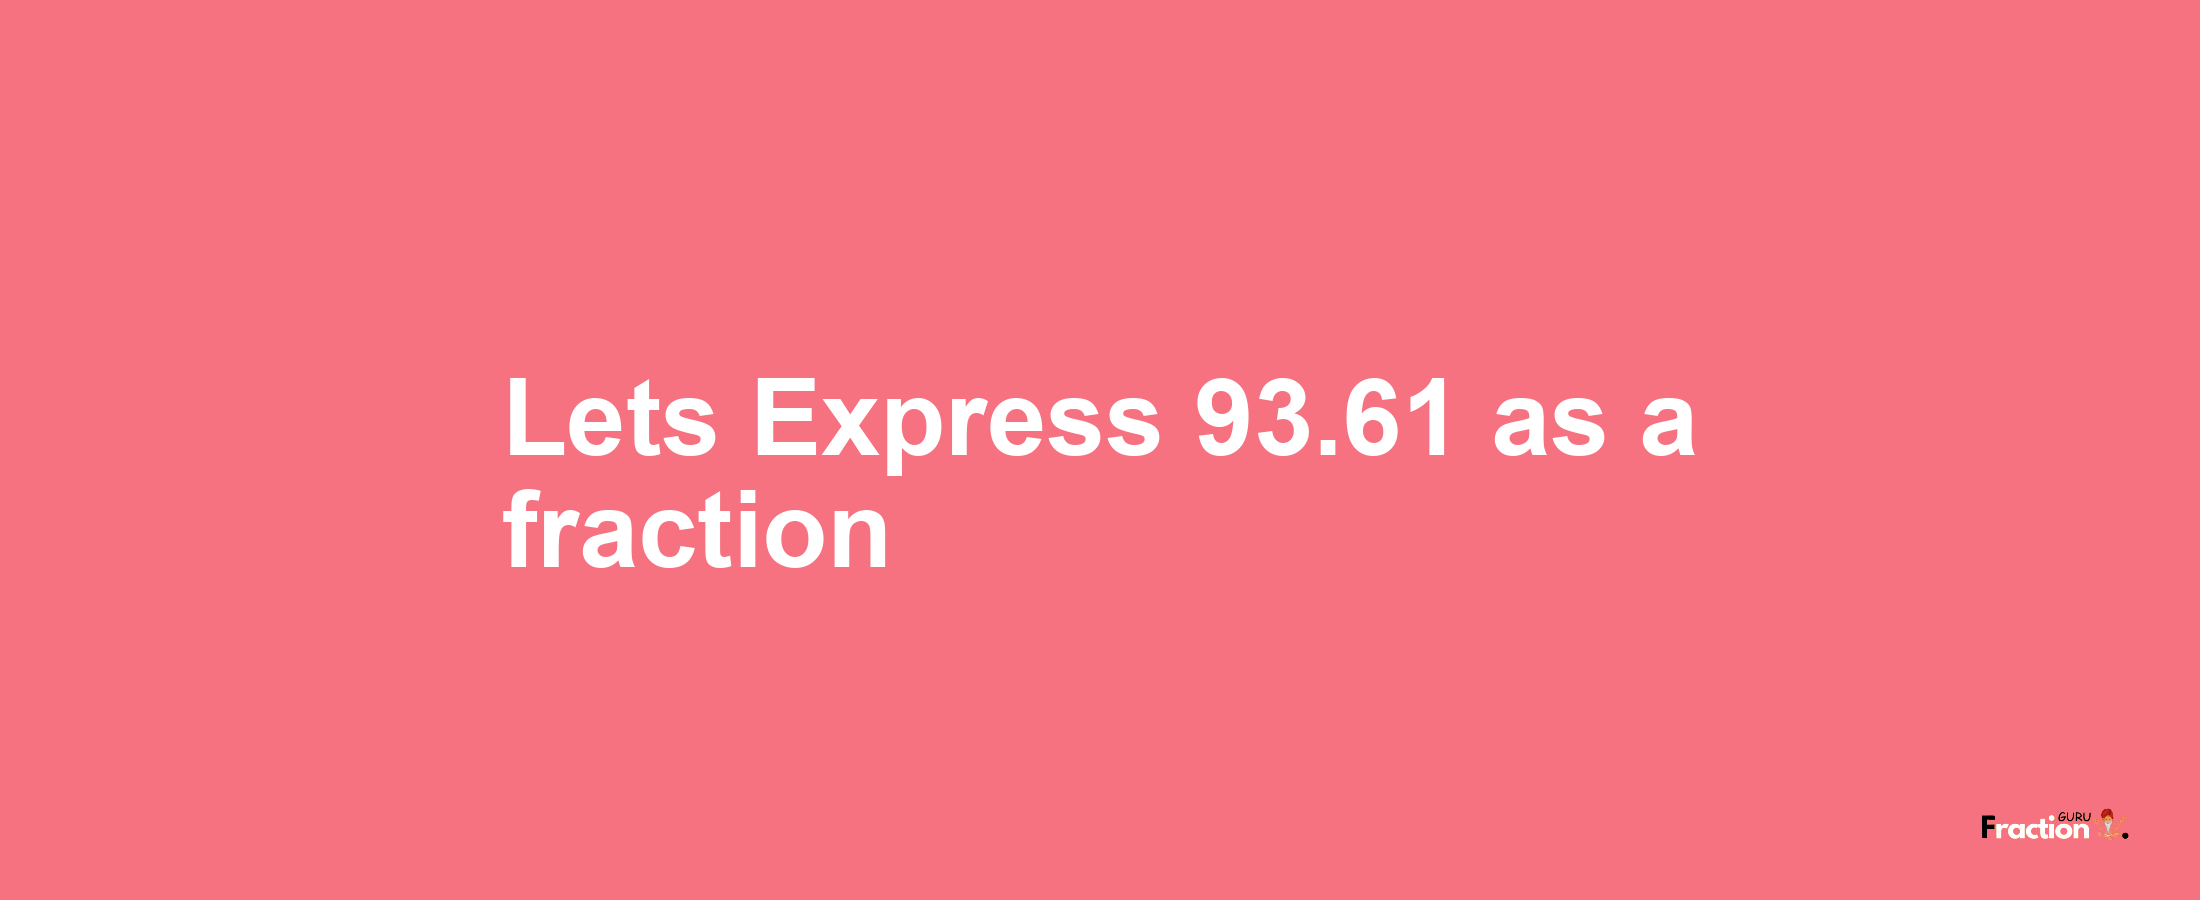 Lets Express 93.61 as afraction